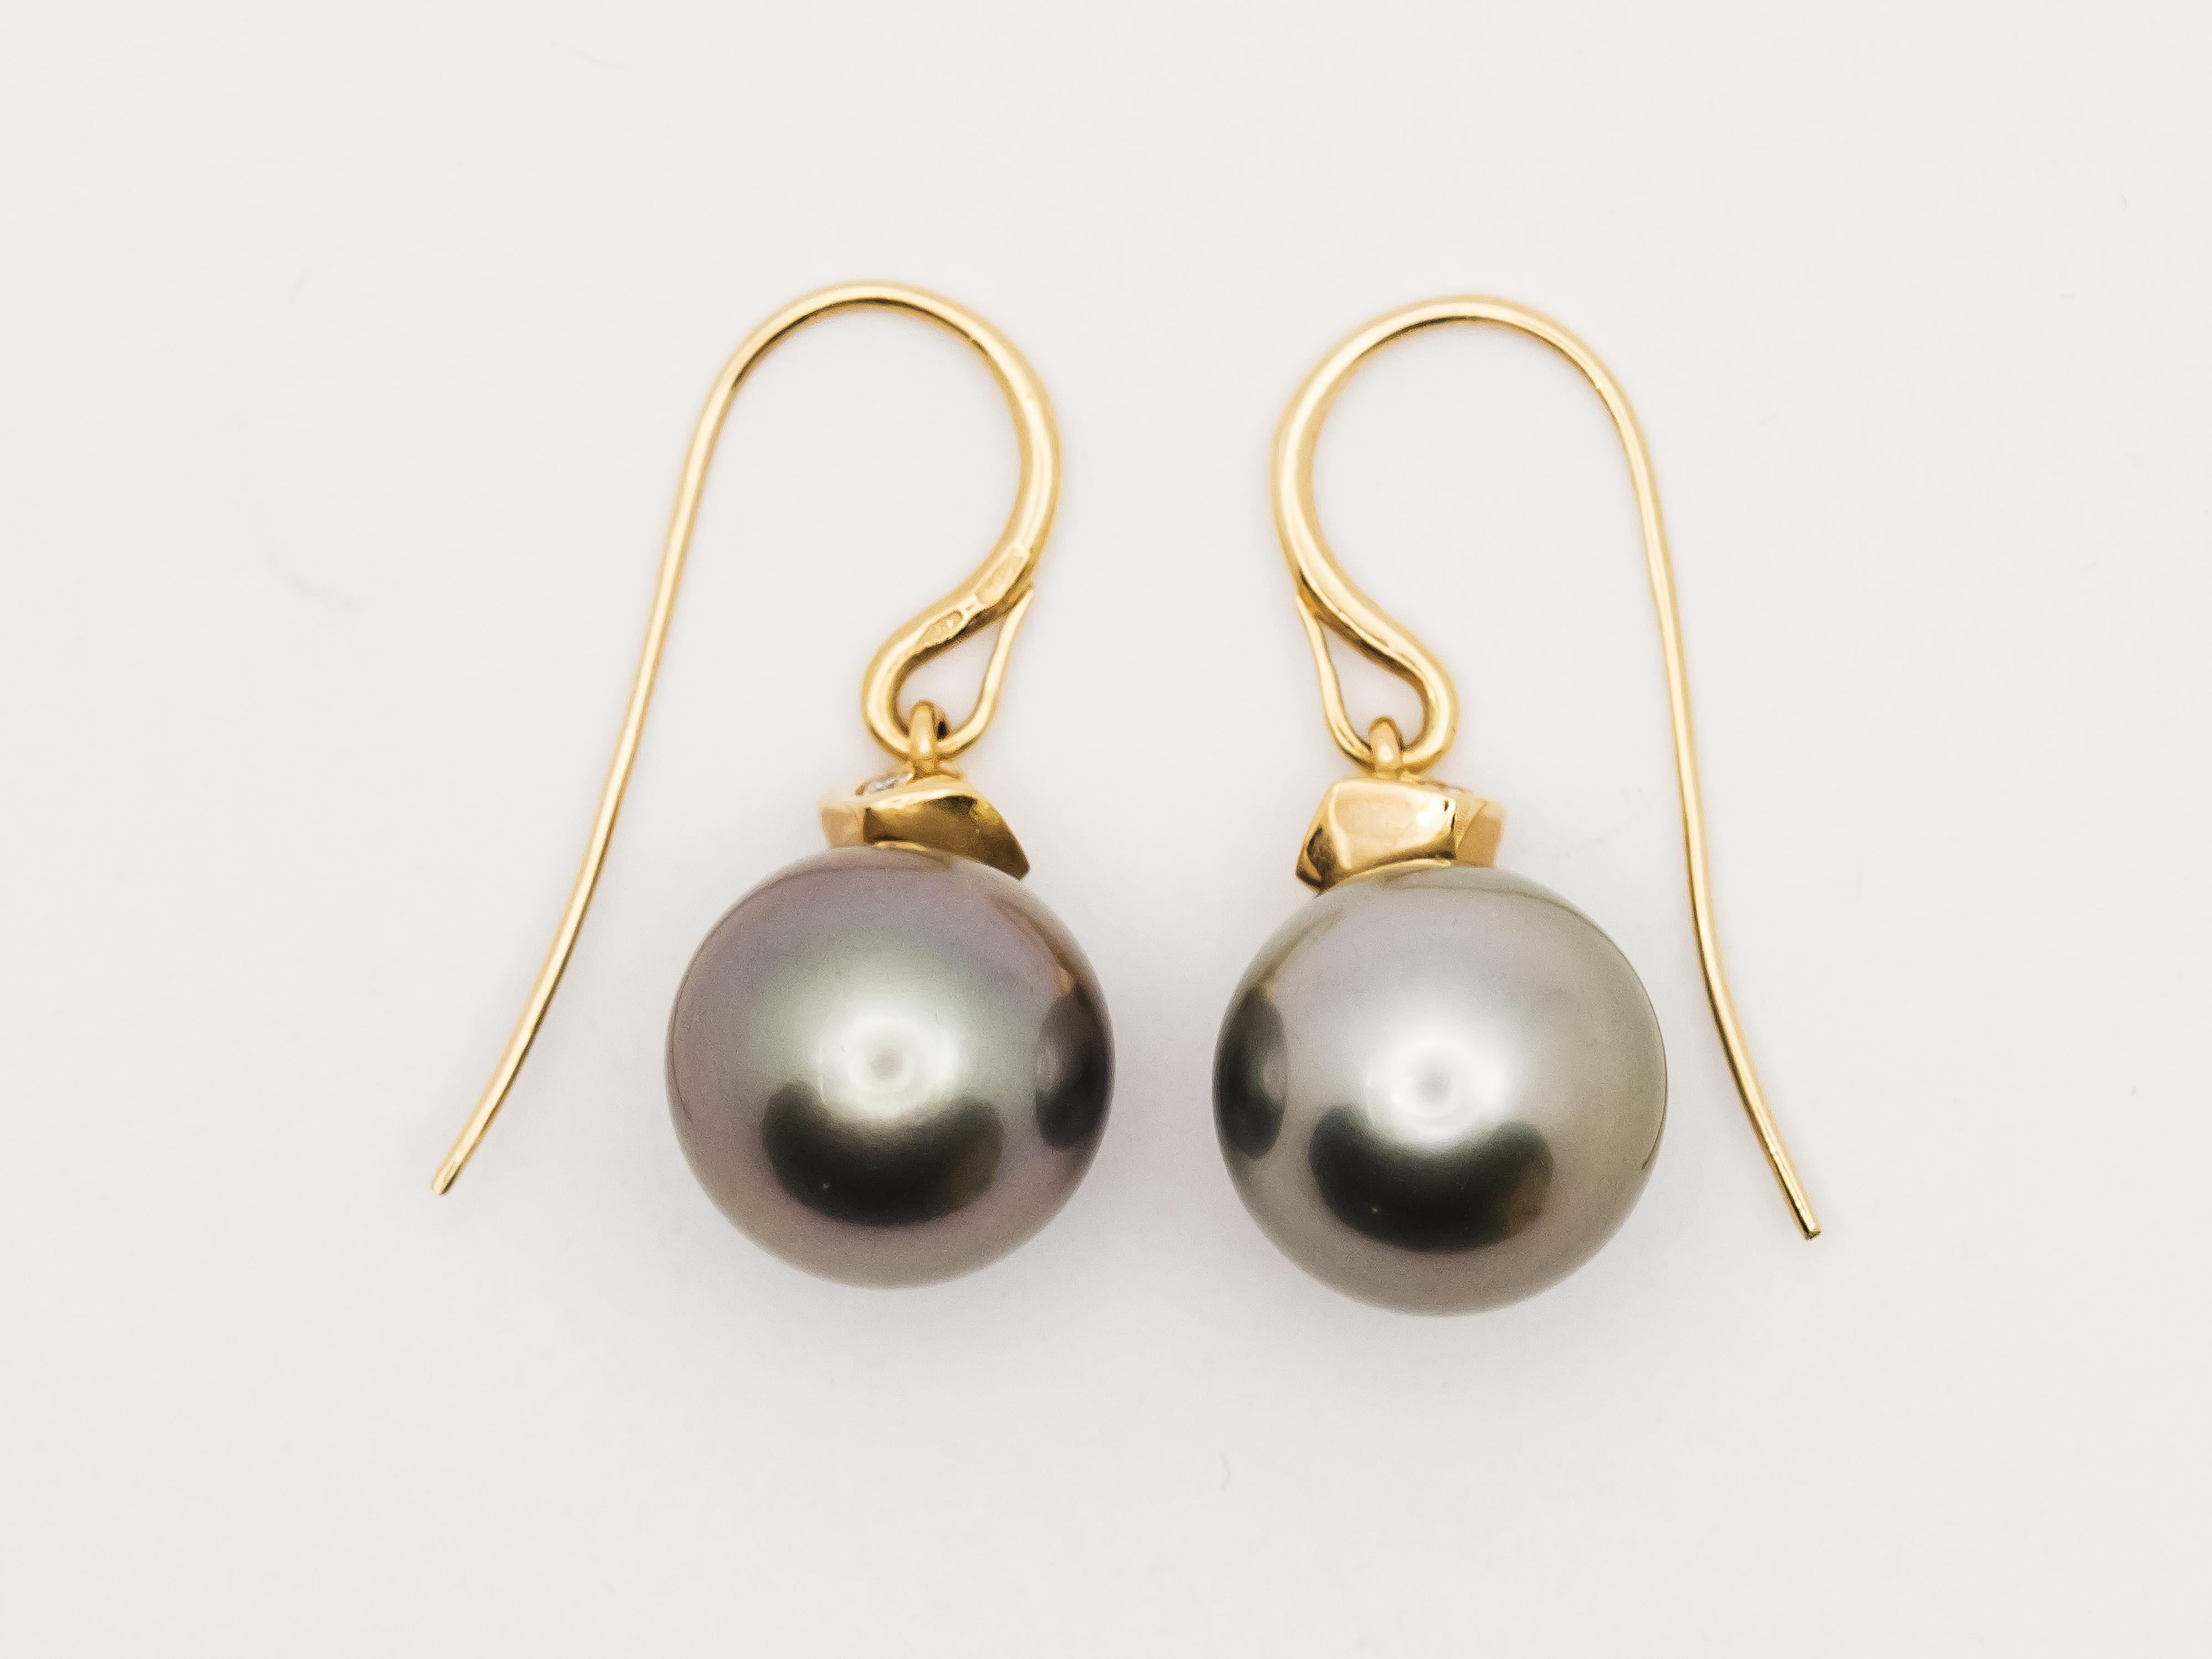 Rose Gold Earrings with Tahitian Pearls and Diamonds In New Condition For Sale In Cattolica, IT